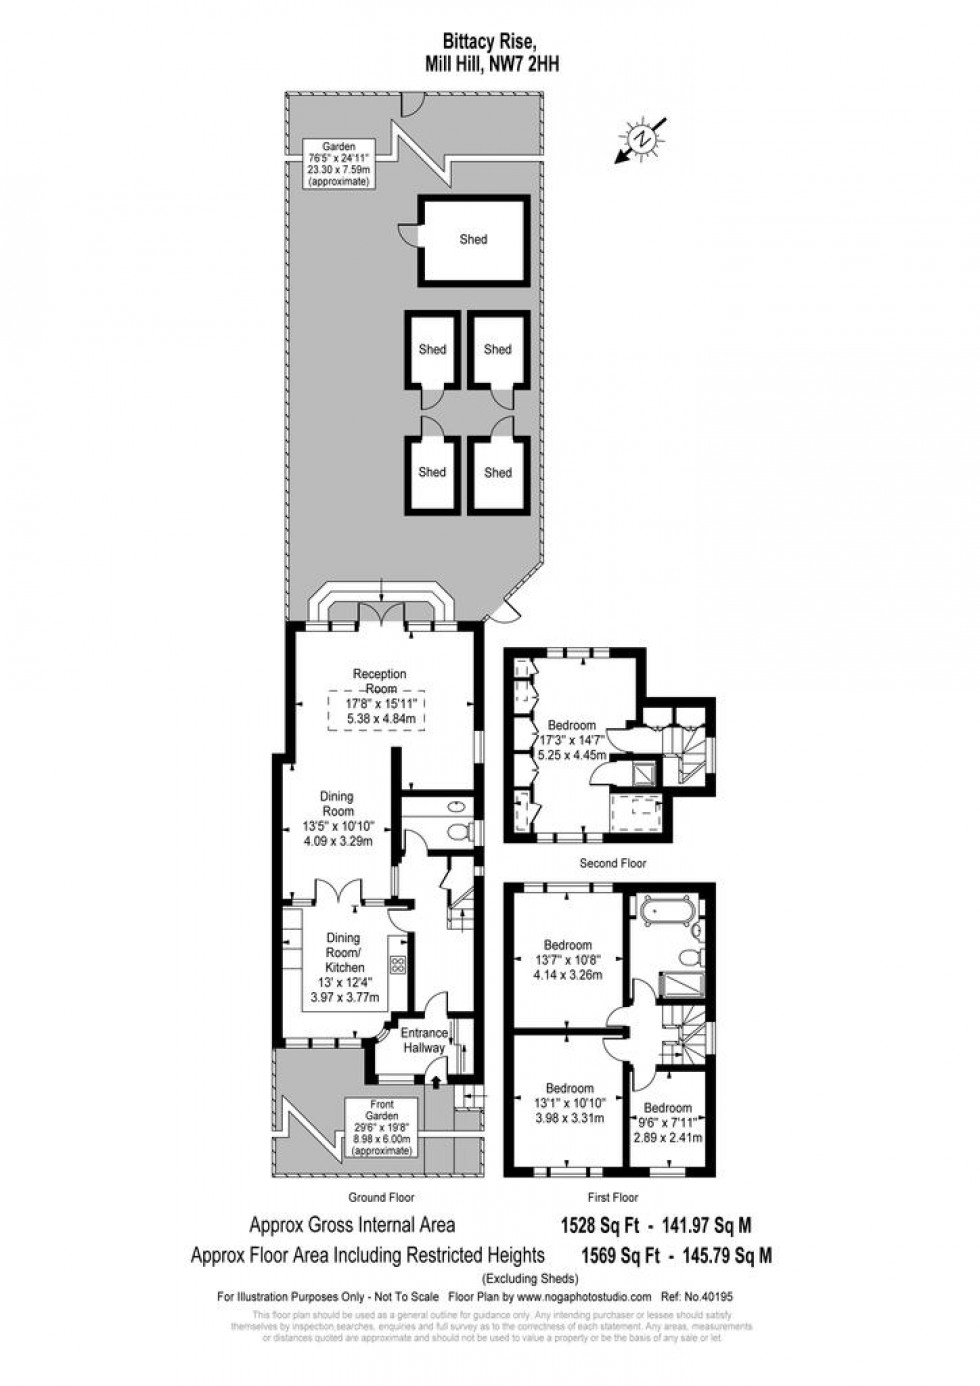 Floorplan for Bittacy Rise, Mill Hill